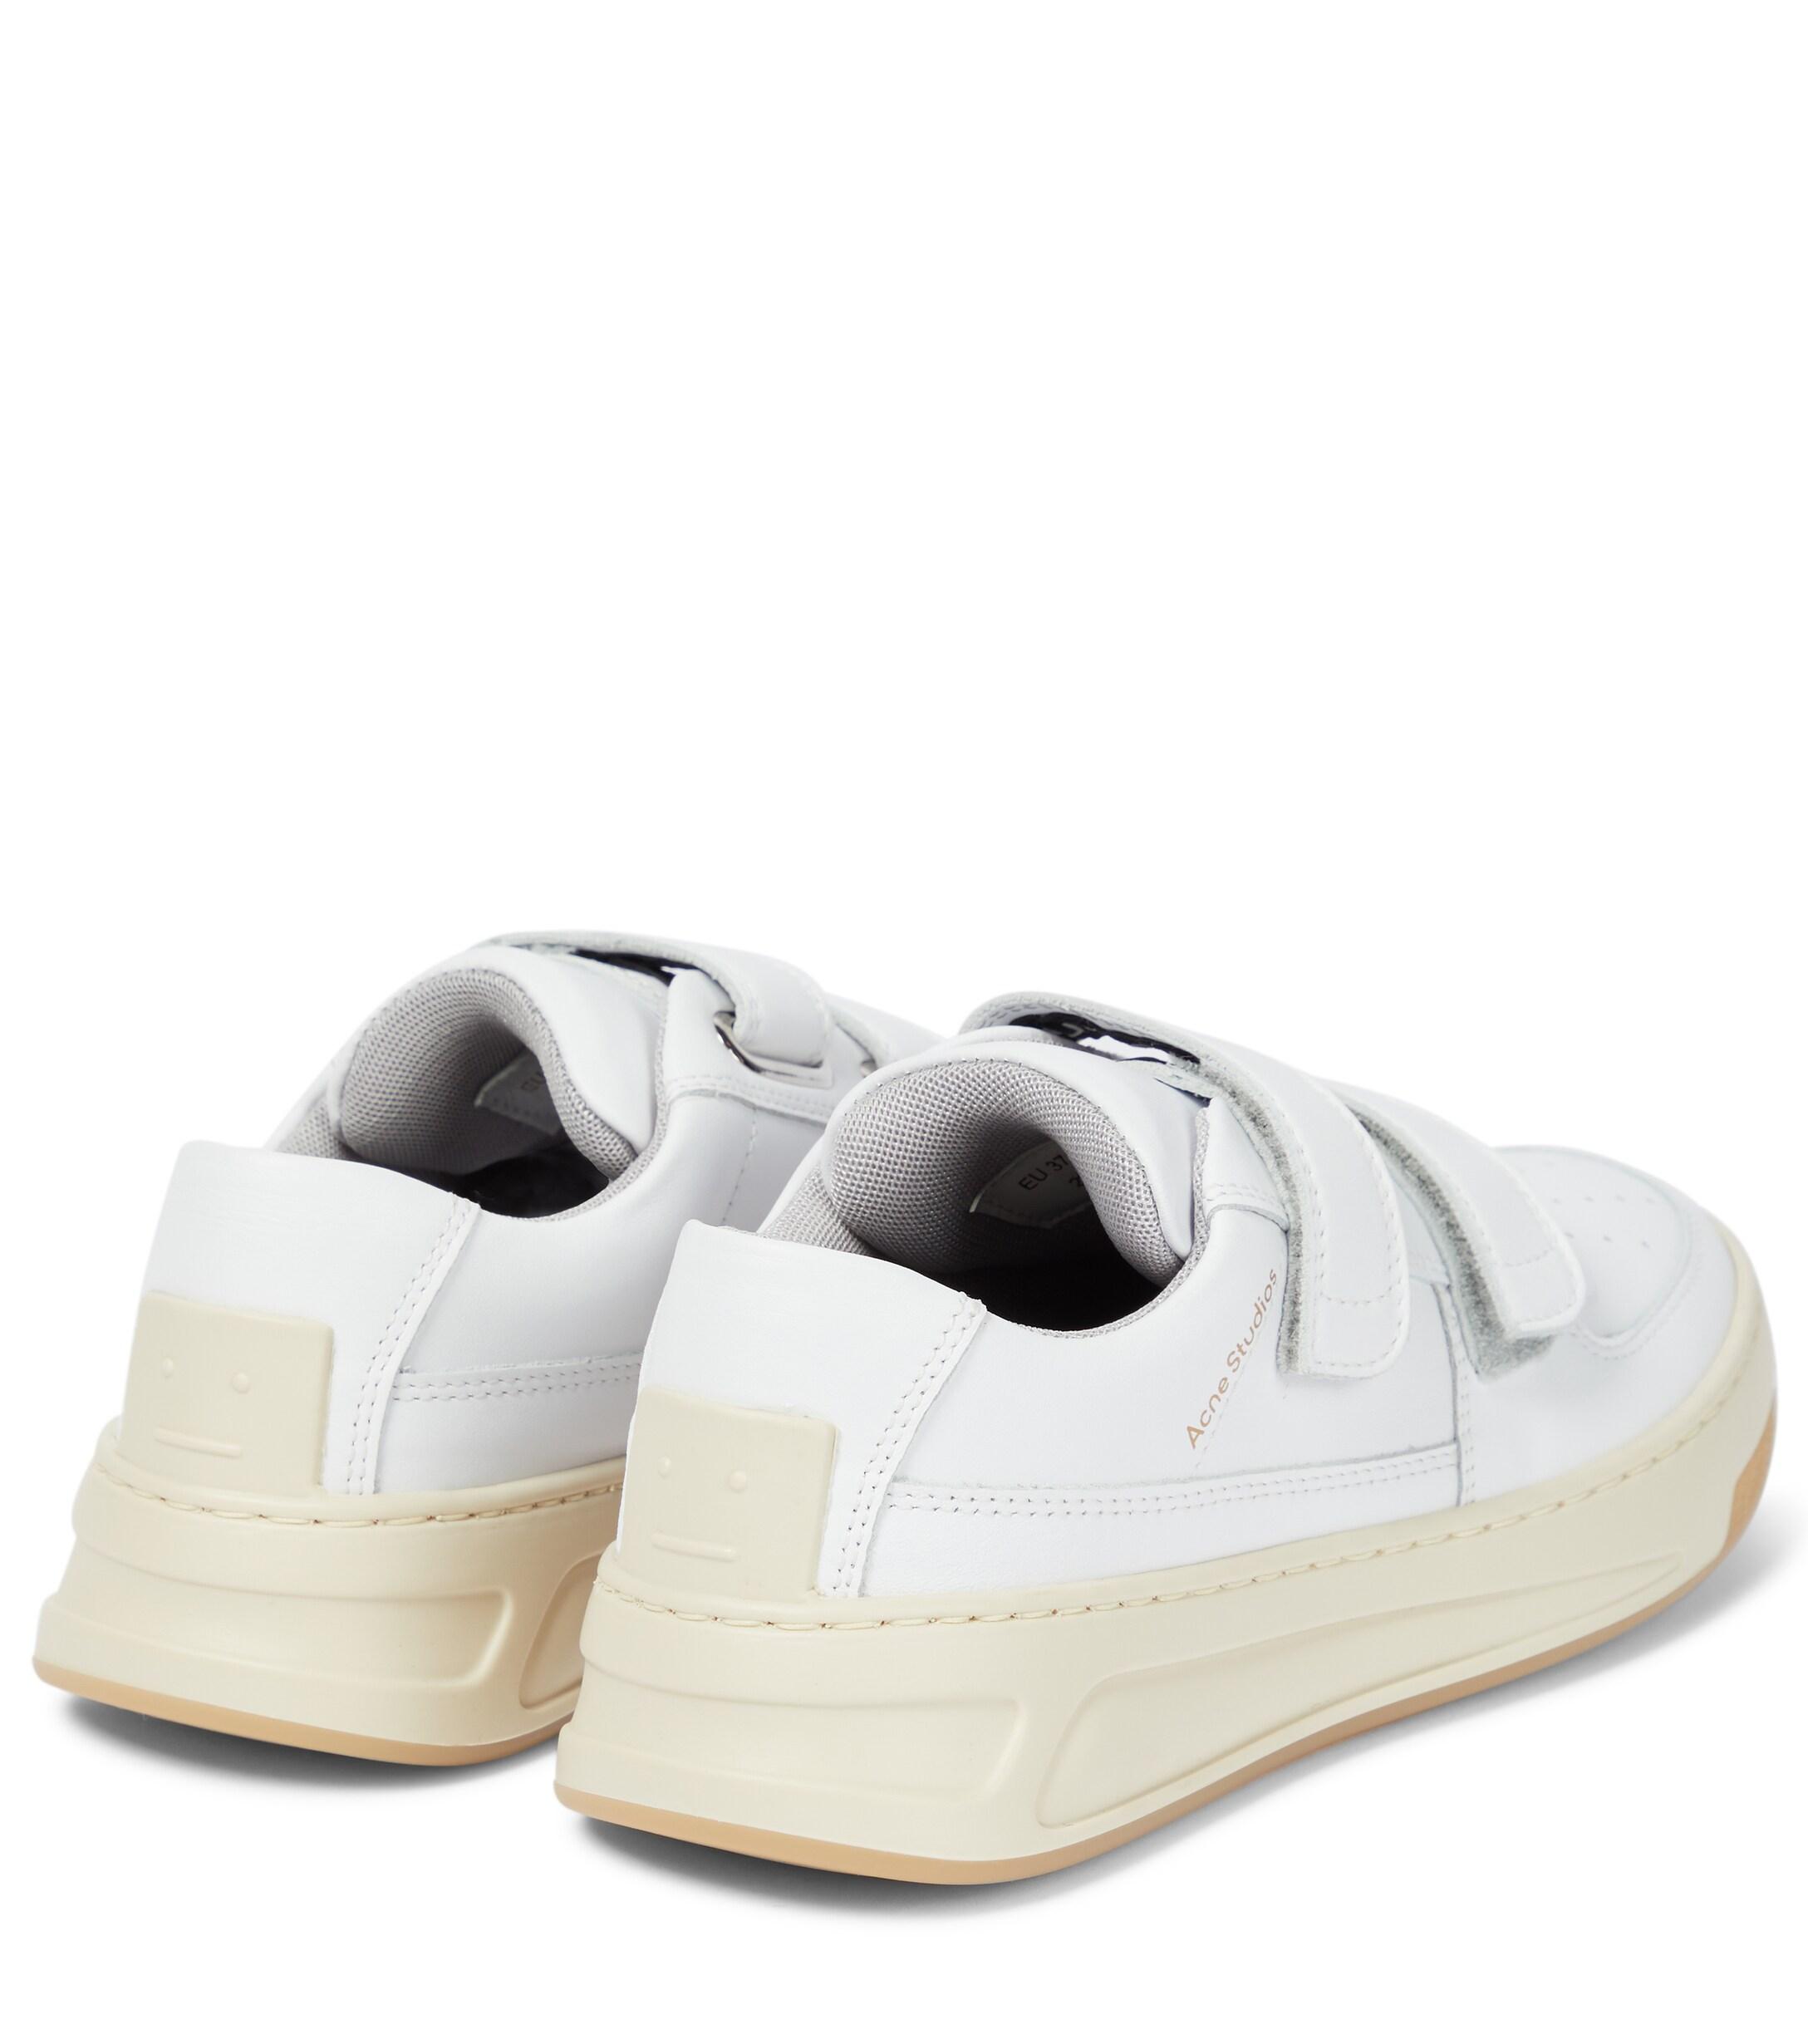 Acne Studios Steffey Leather Sneakers in White - Save 42% - Lyst